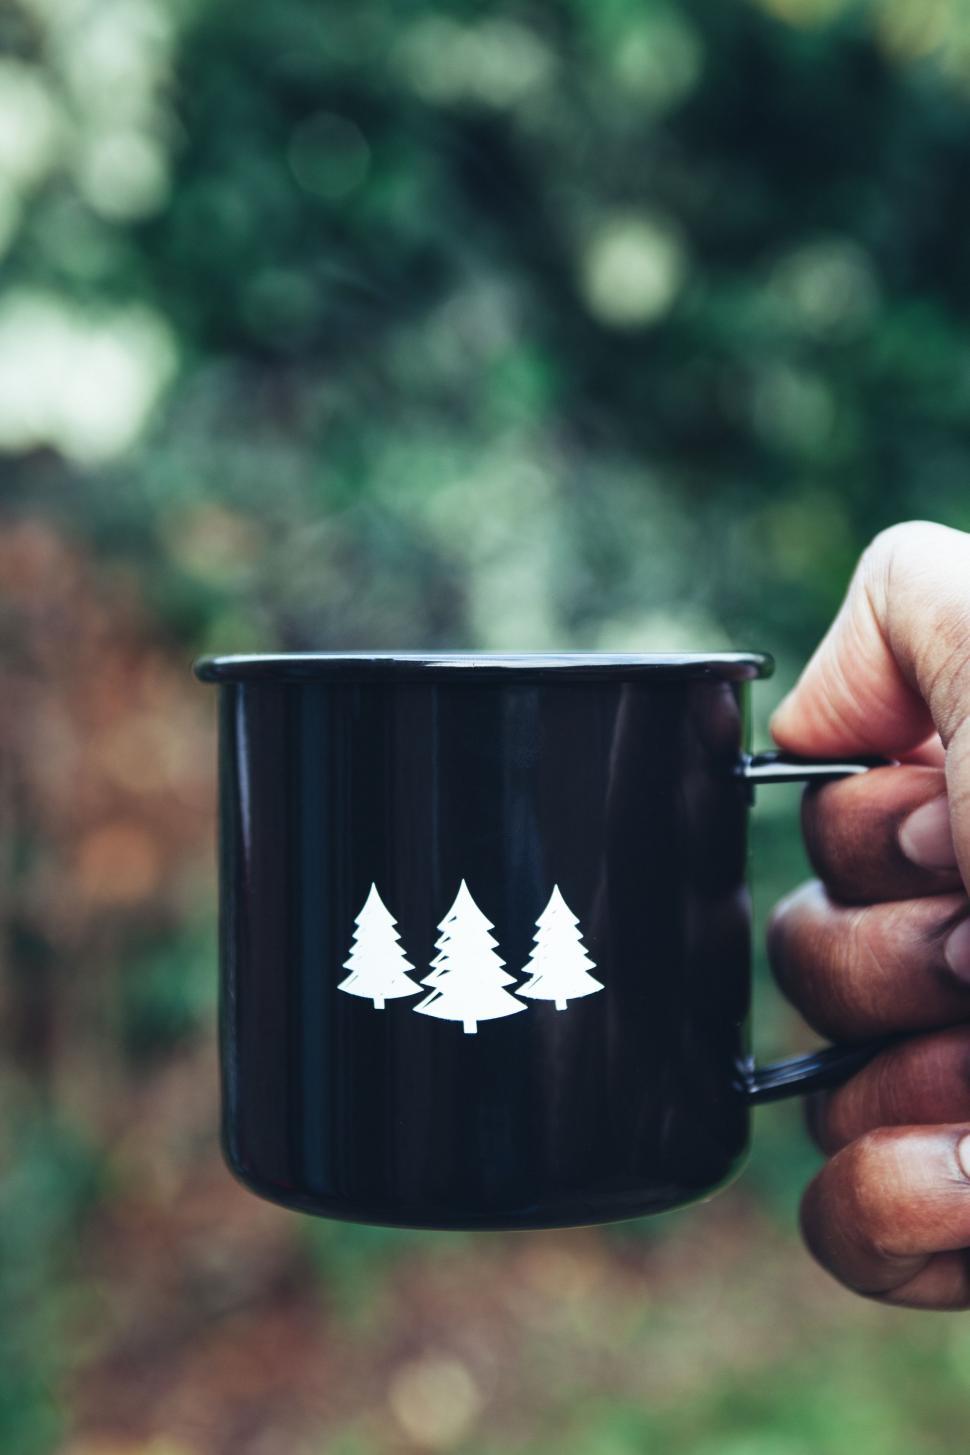 Free Image of Person Holding Black Coffee Mug With White Trees Design 